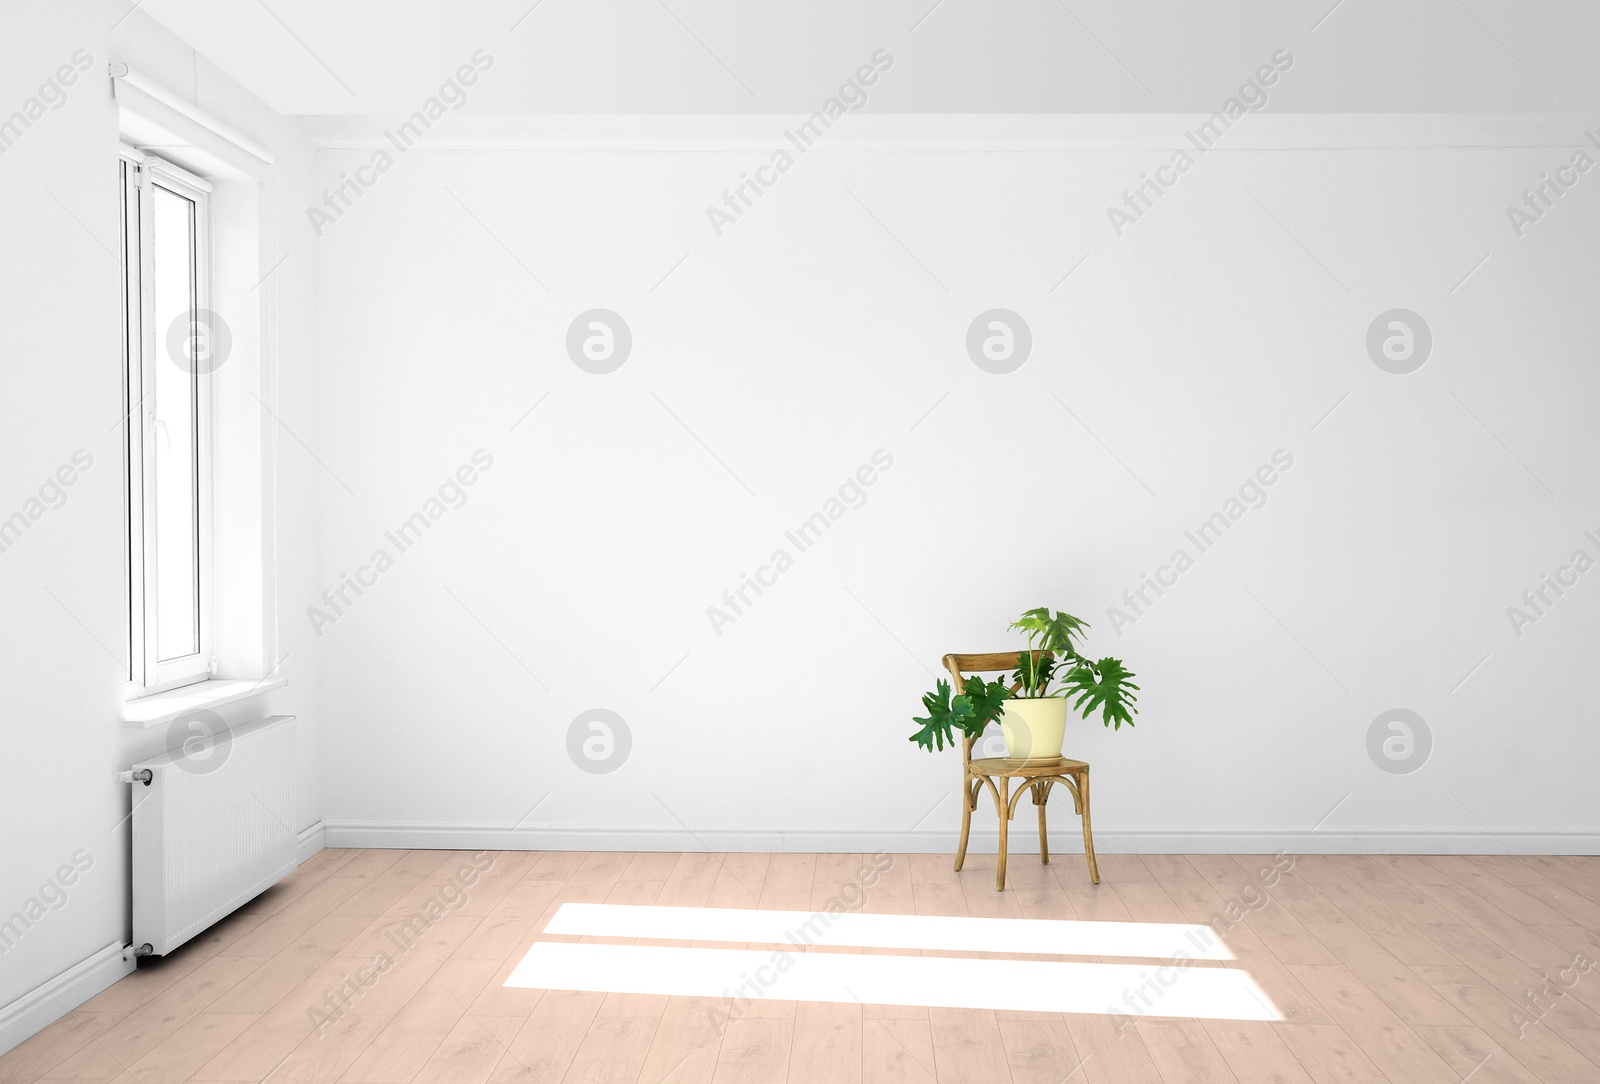 Photo of Living room interior with window and houseplant on chair